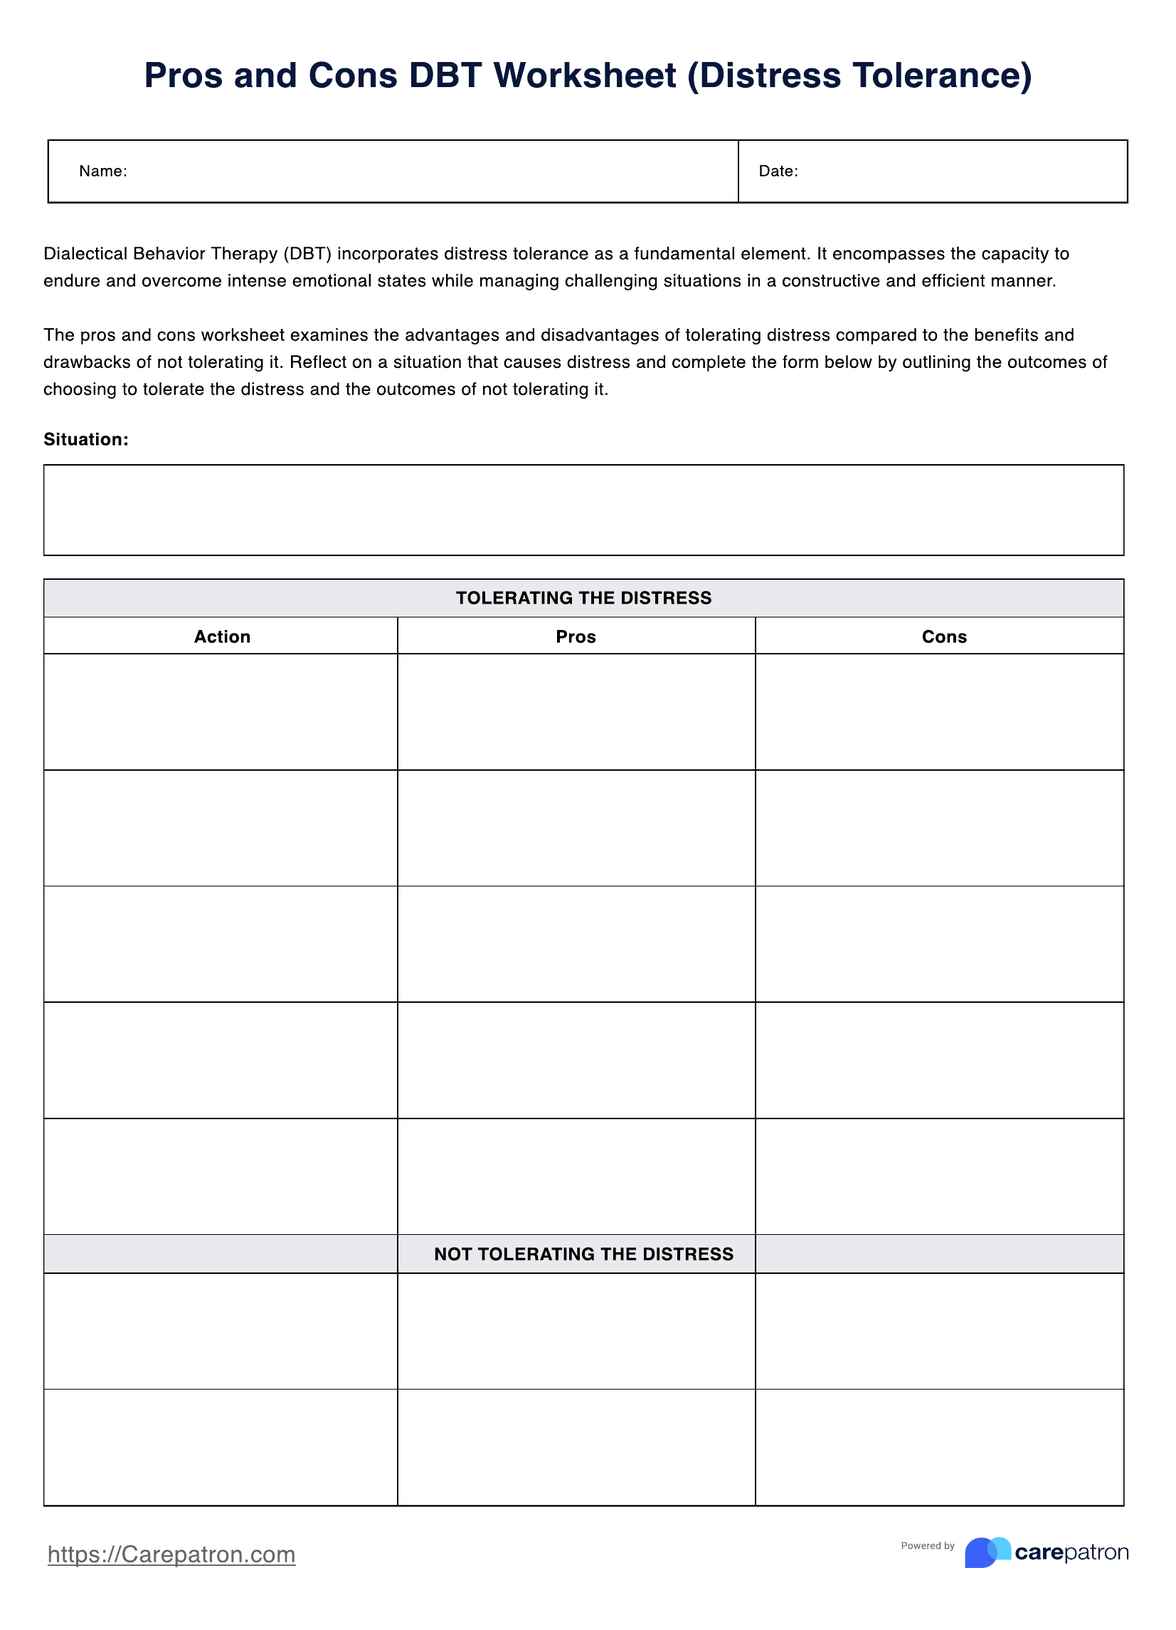 Pros and Cons DBT Worksheet PDF Example